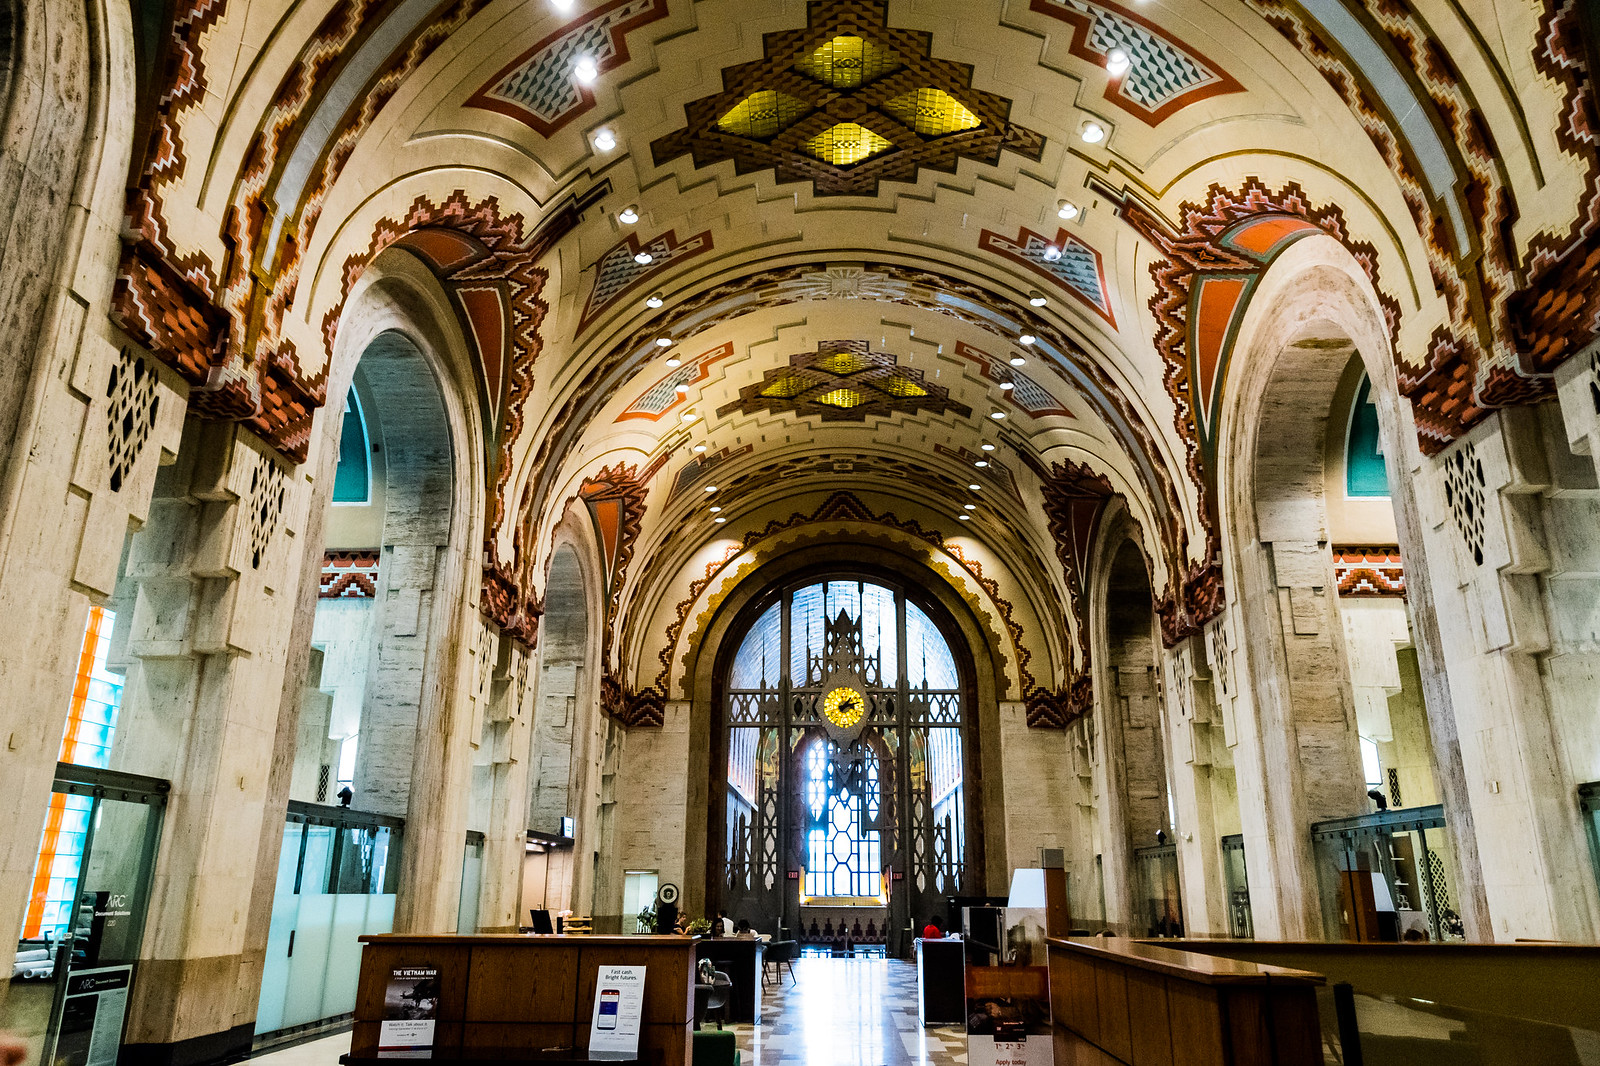 inside the vibrant lobby of the Guardian Building